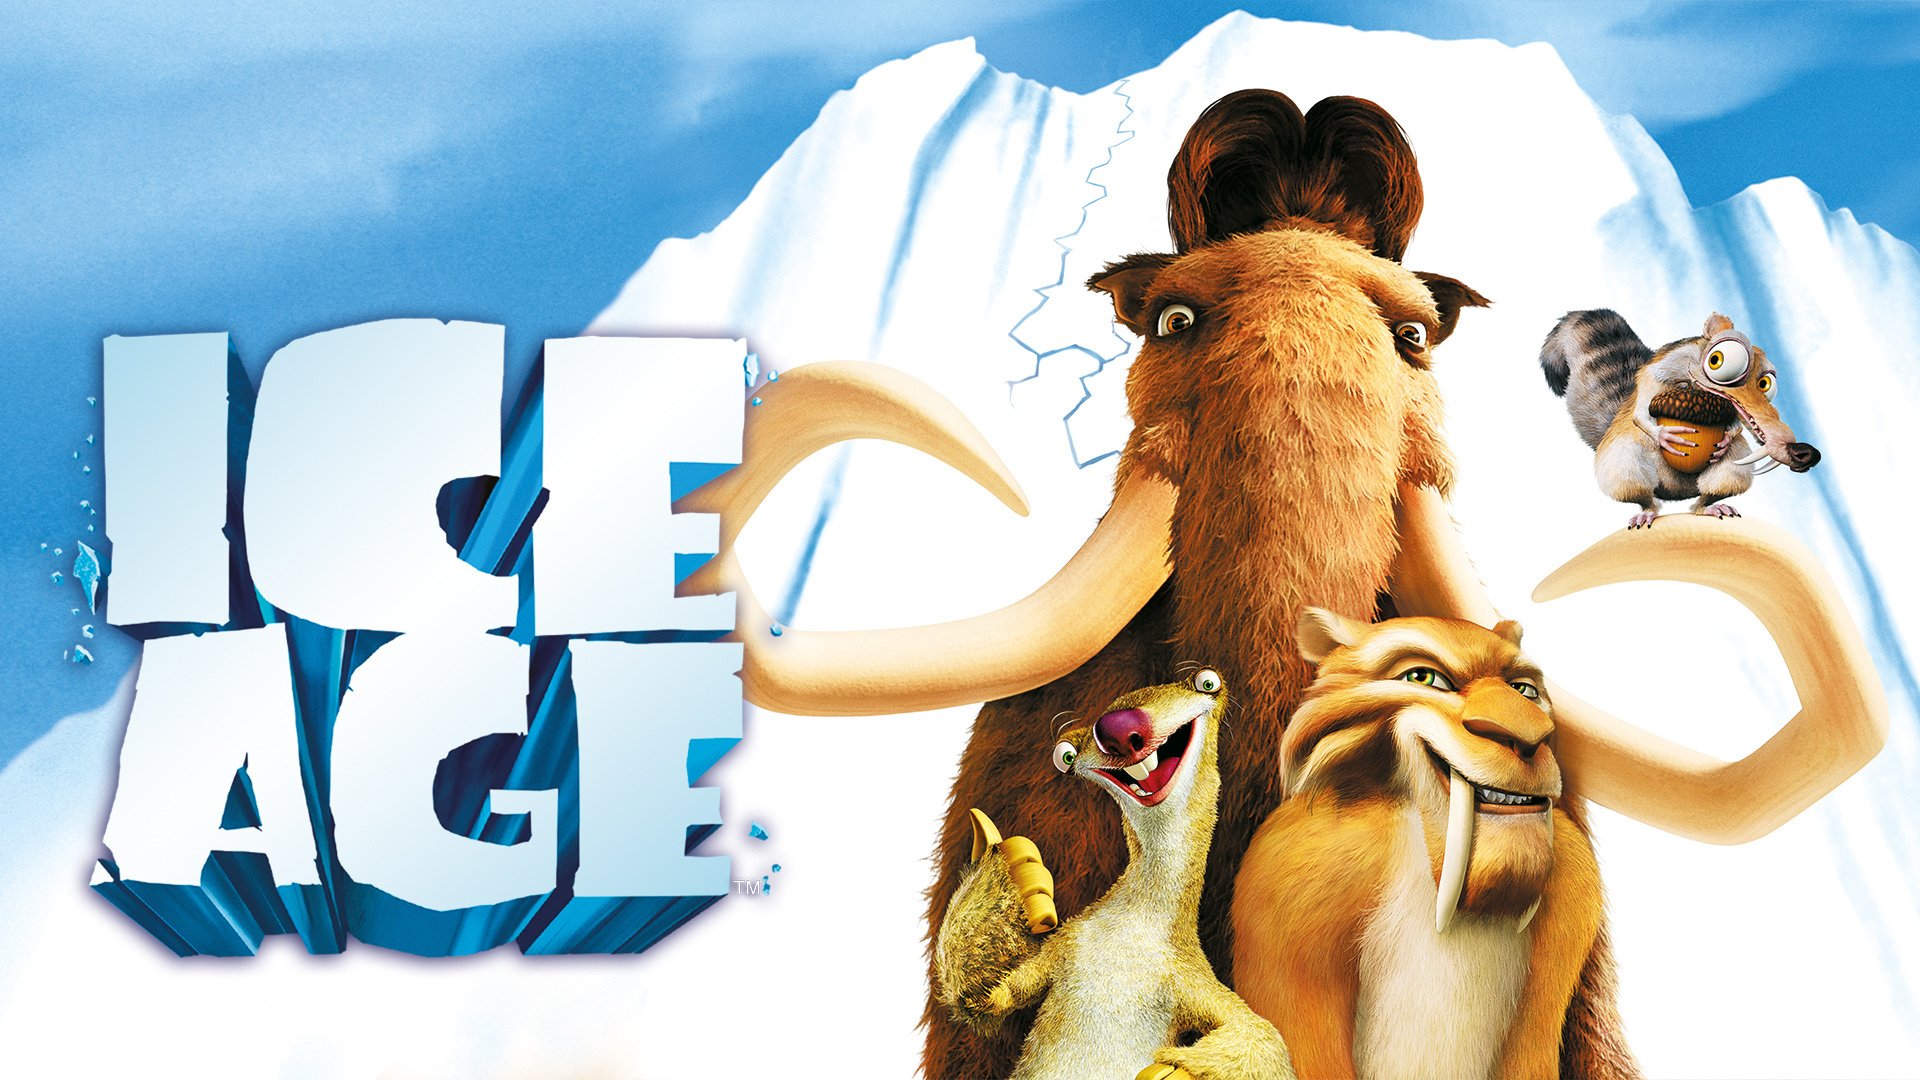 100 Ice Age HD Wallpapers and Backgrounds